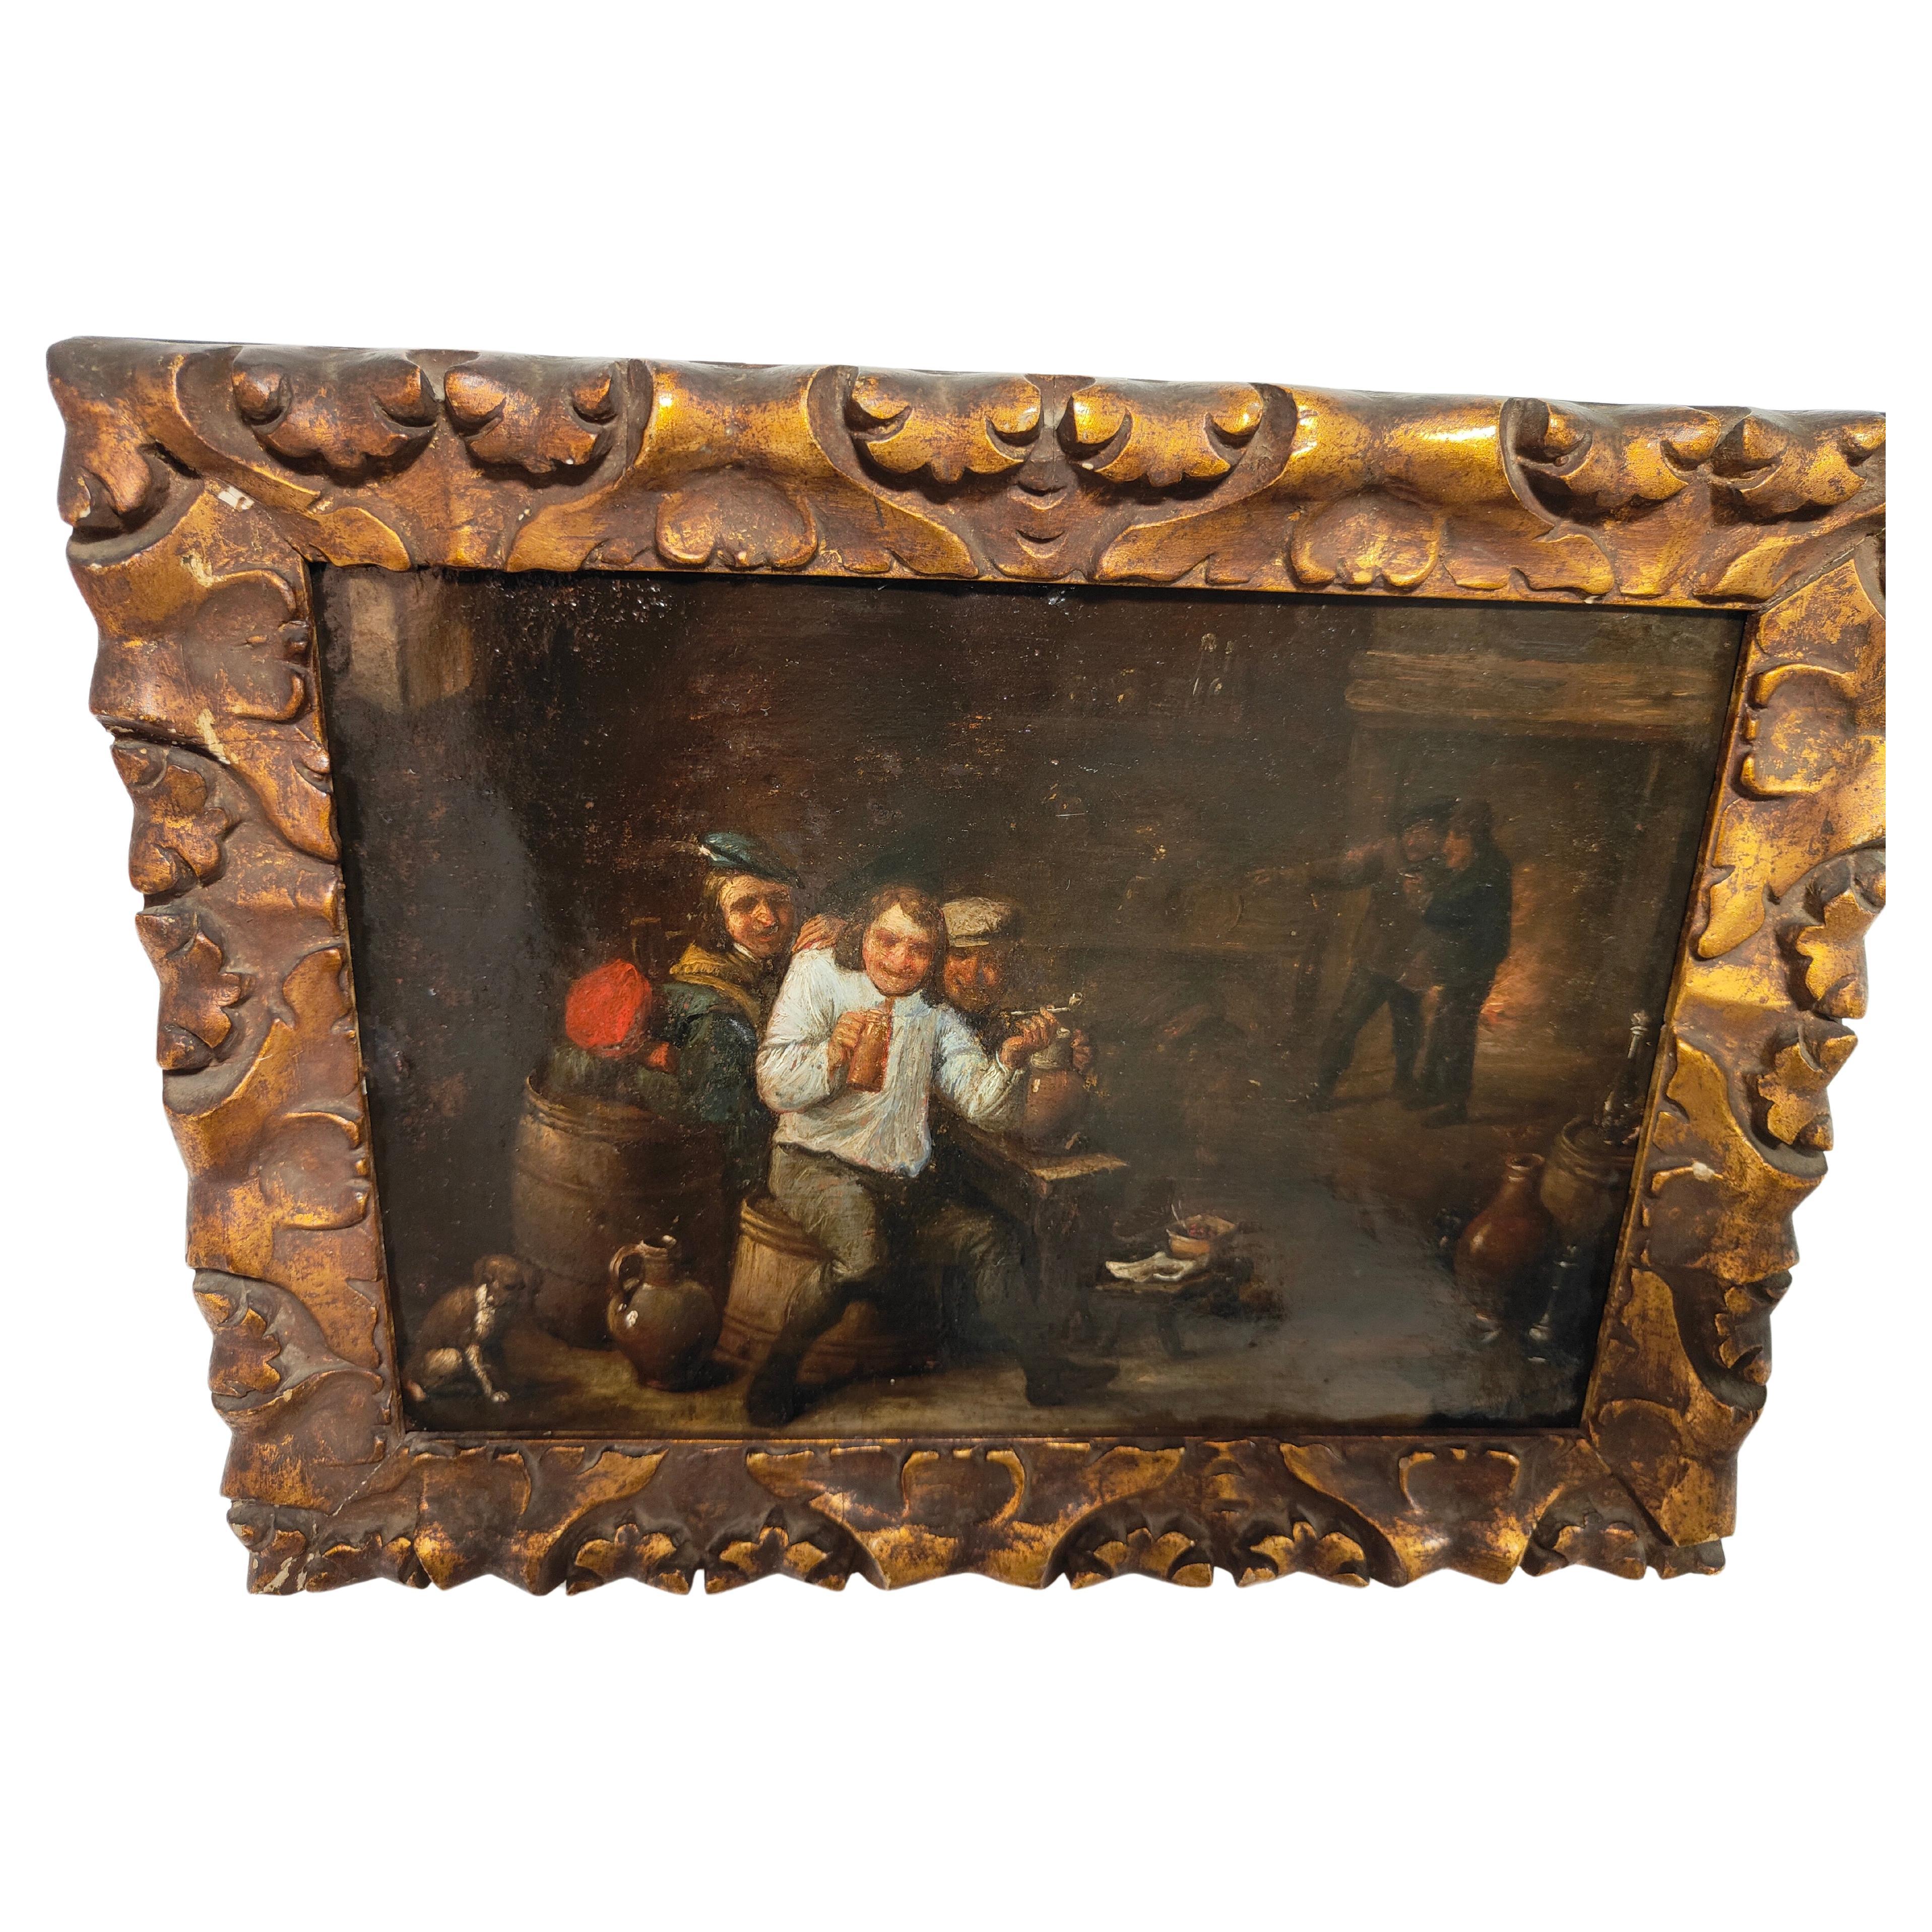  Oil on Copper in the Style of David Teniers, Charming 17th Century Oil Painting For Sale